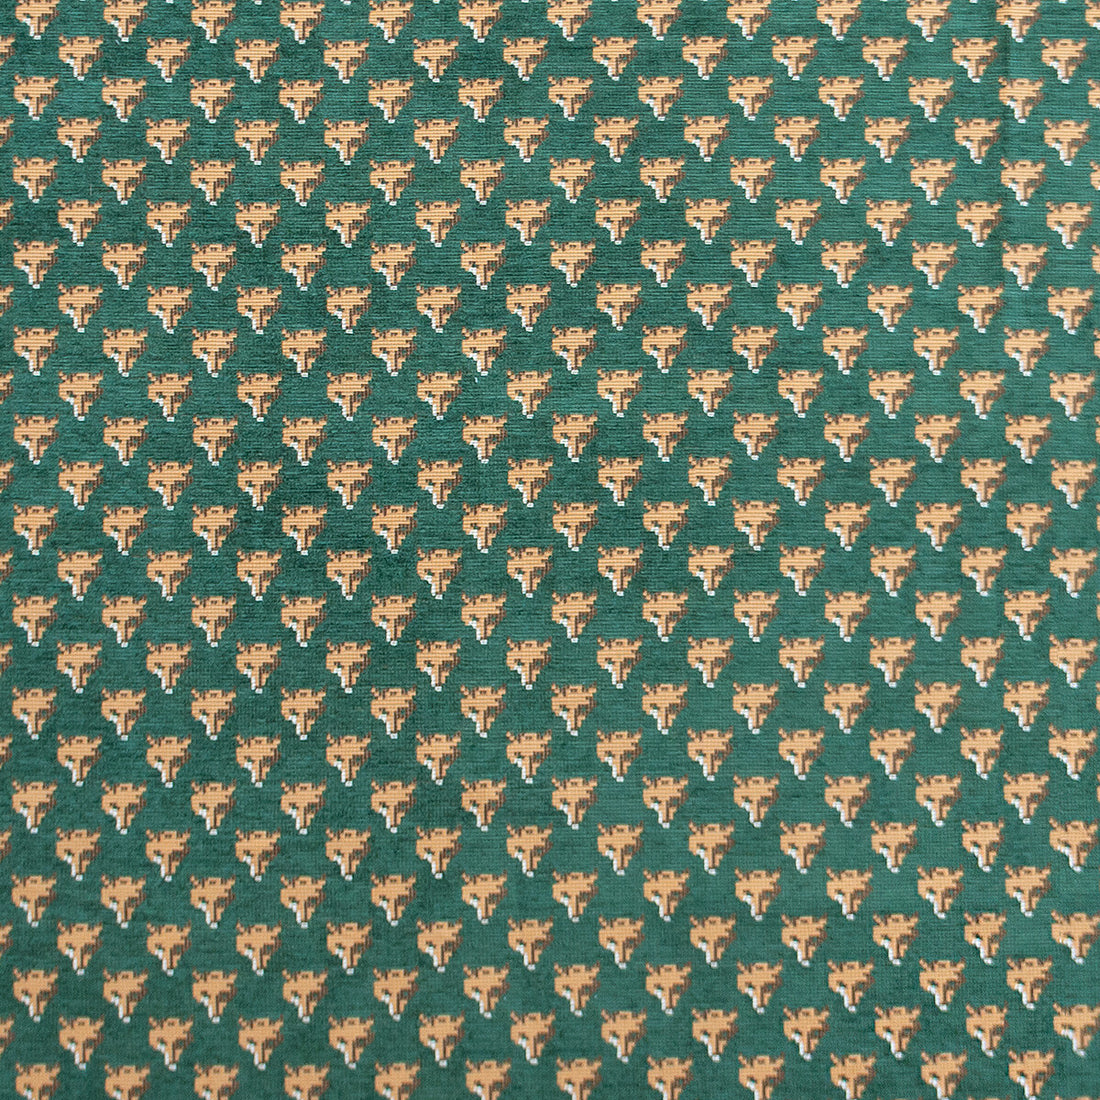 Raposu fabric in verde color - pattern LCT1077.002.0 - by Gaston y Daniela in the Lorenzo Castillo VII The Rectory collection